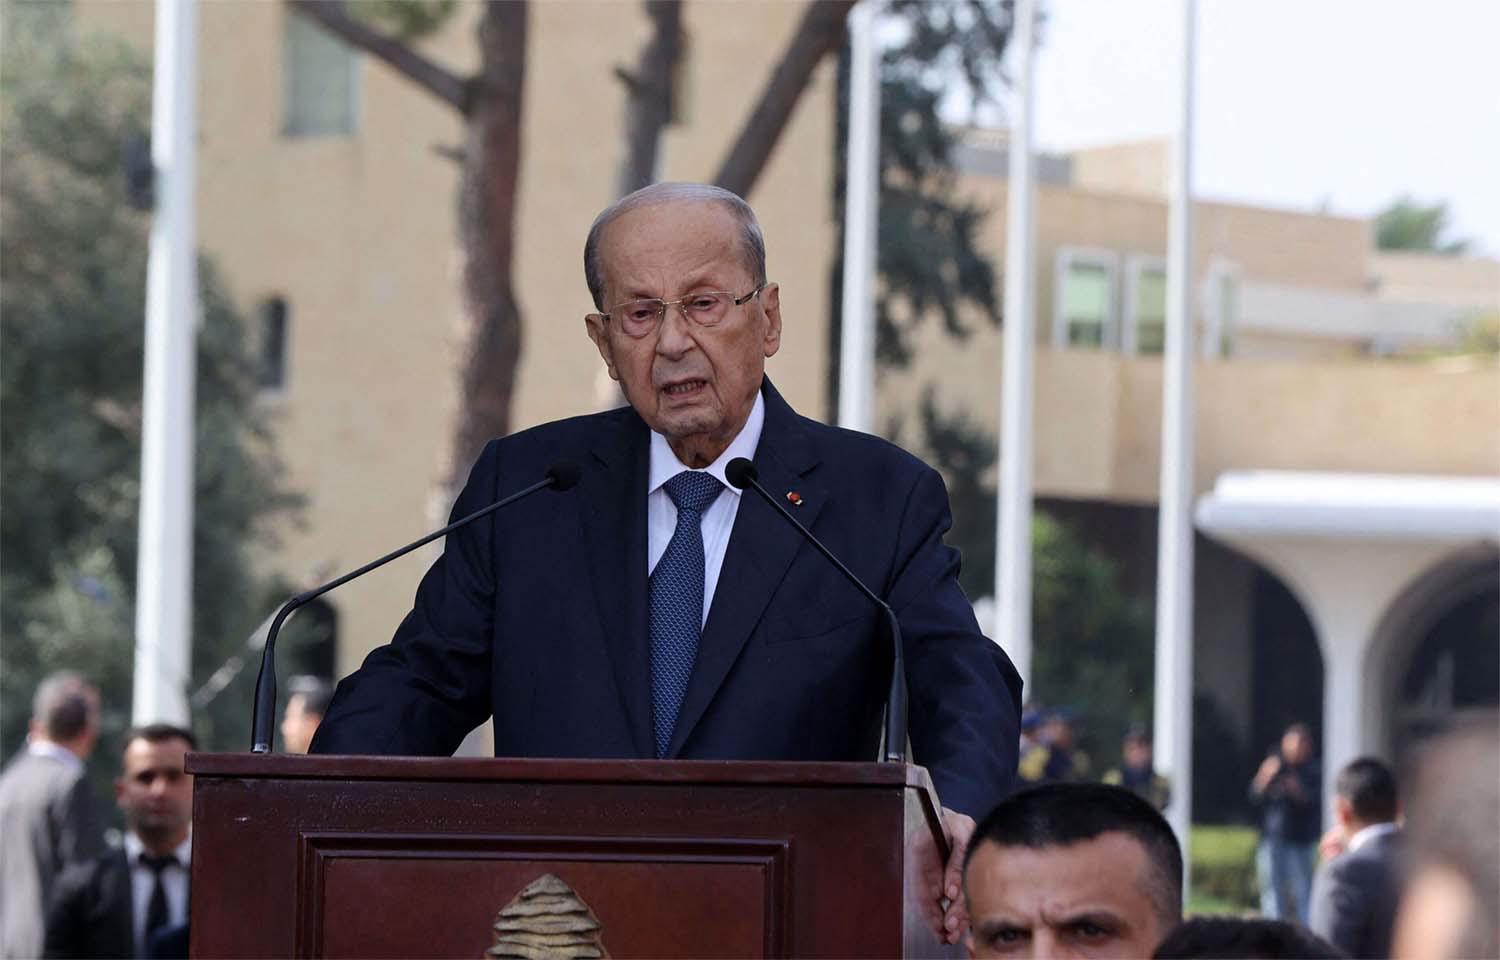 Government and economic advisors familiar with the matter say Aoun's inaction was intentional